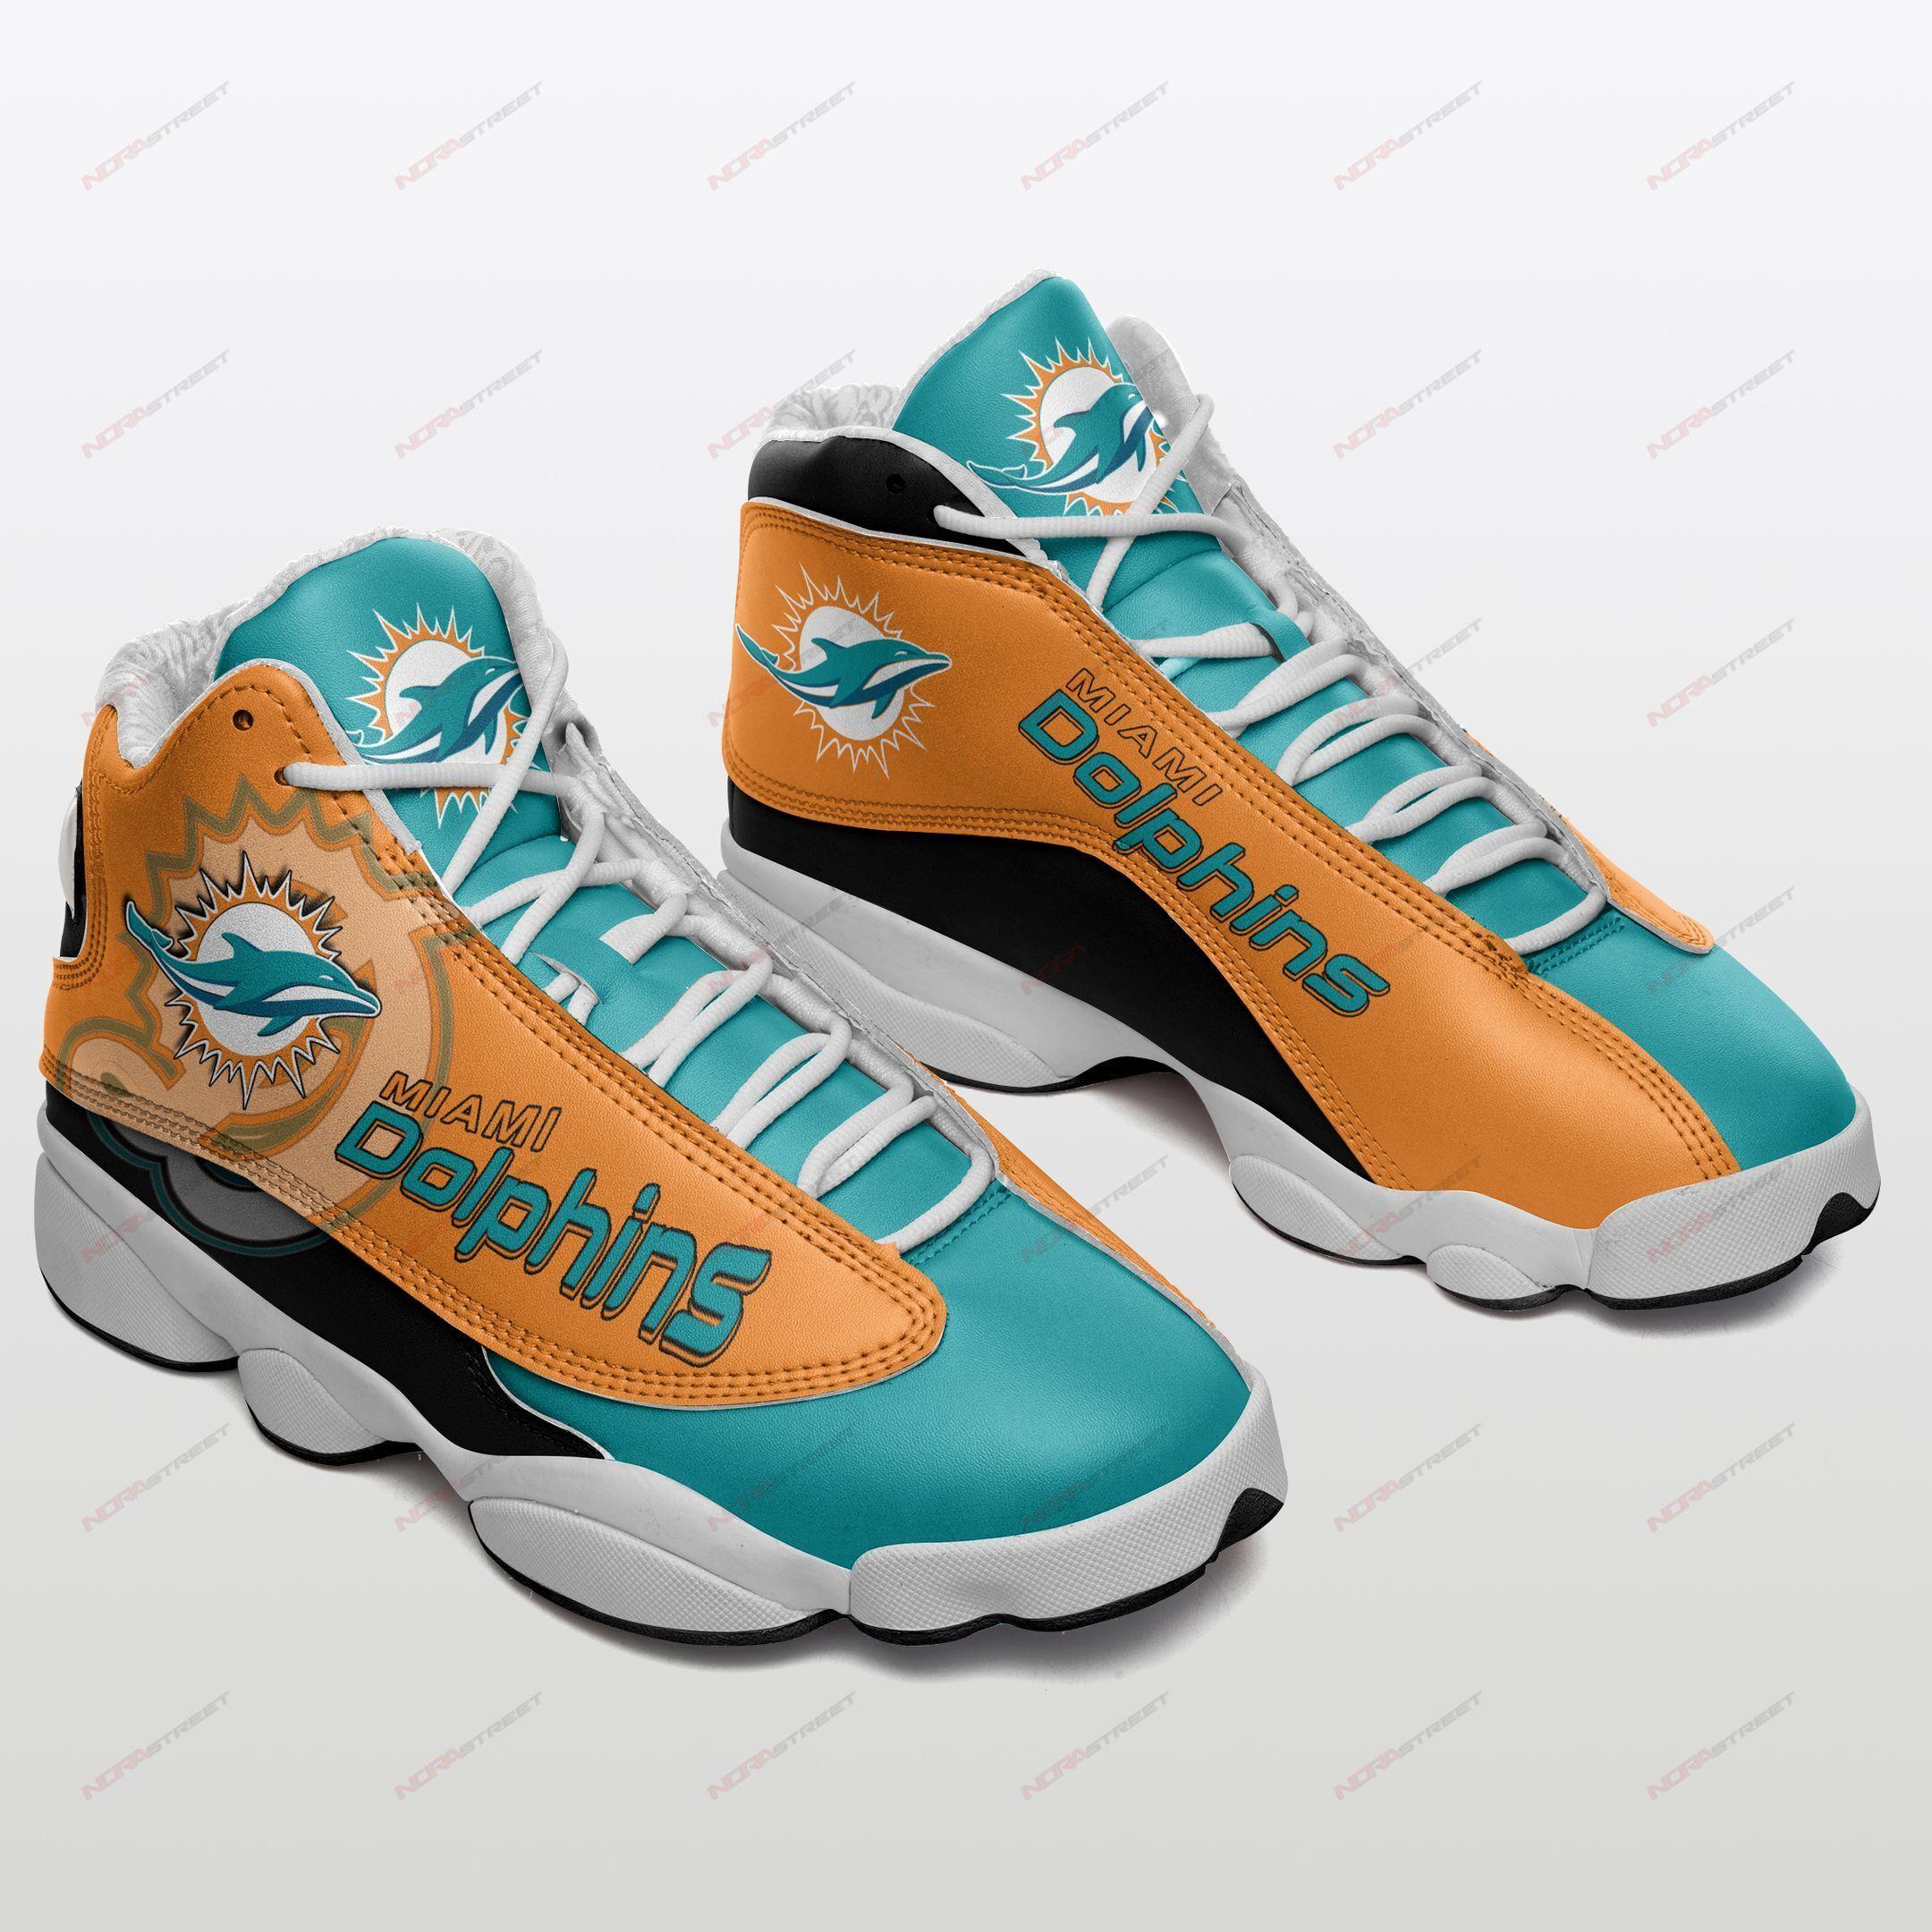 Miami Dolphins Air Jordan 13 Sneakers Sport Shoes Full Size